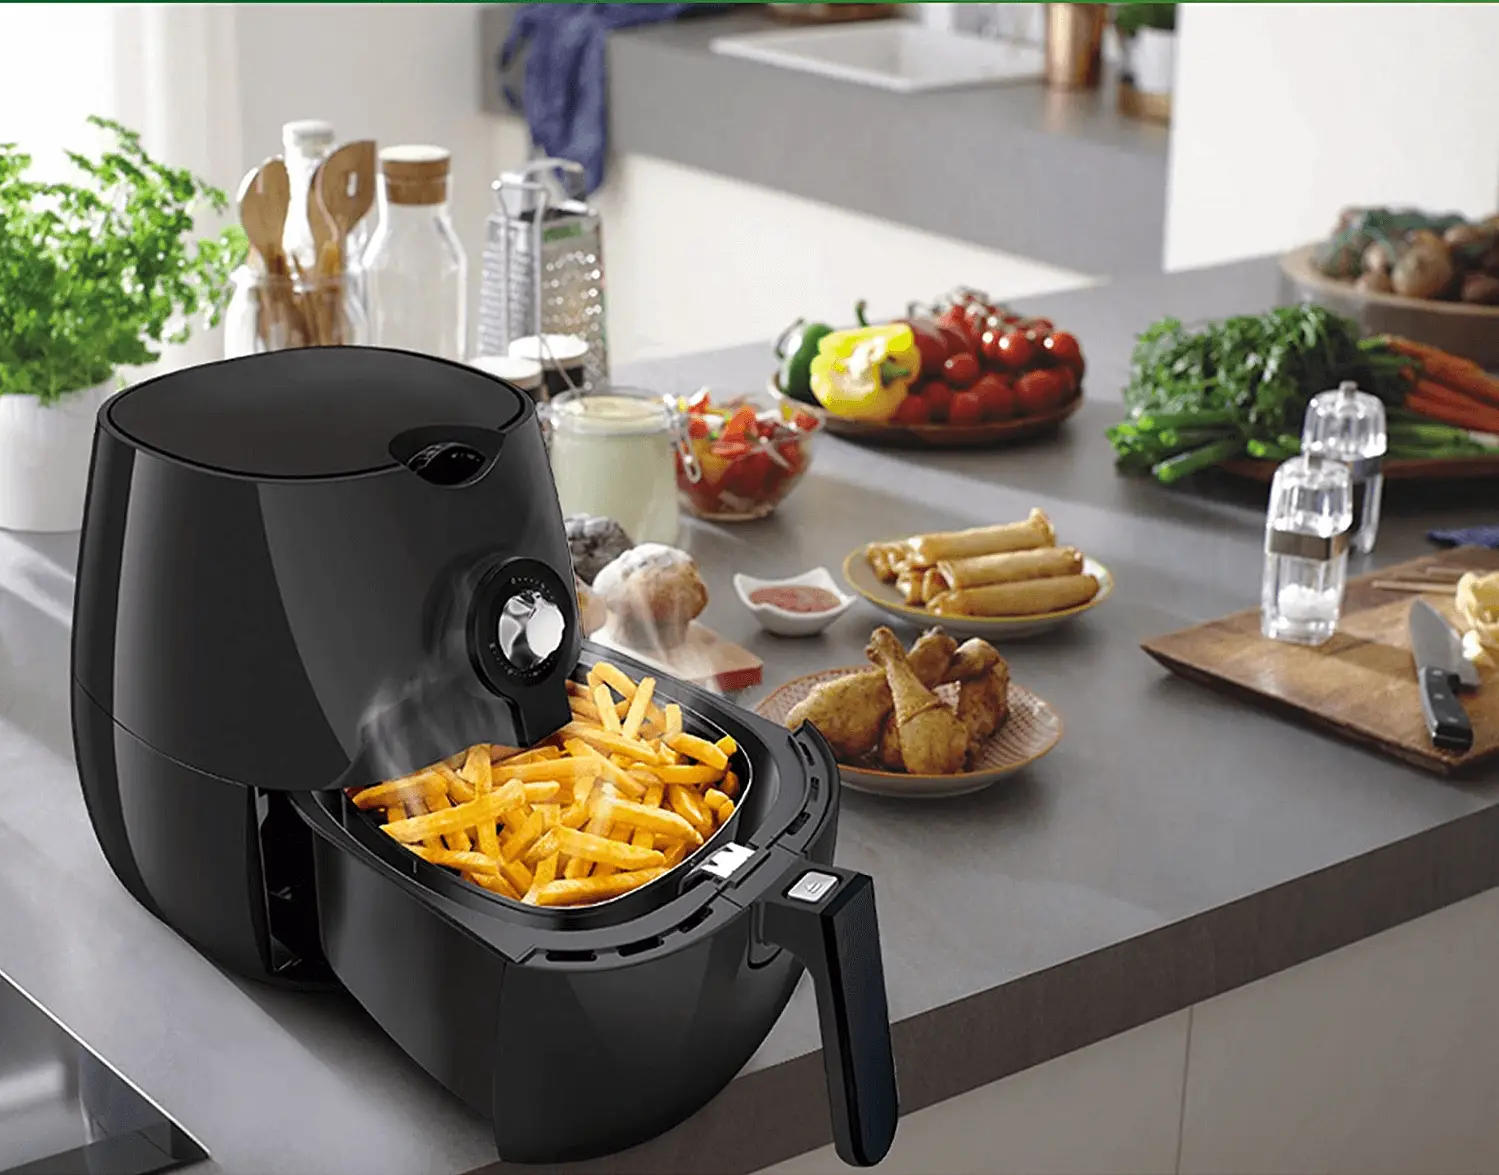 Top 11 Best Air fryer in India 2021 for home: Buyers ...